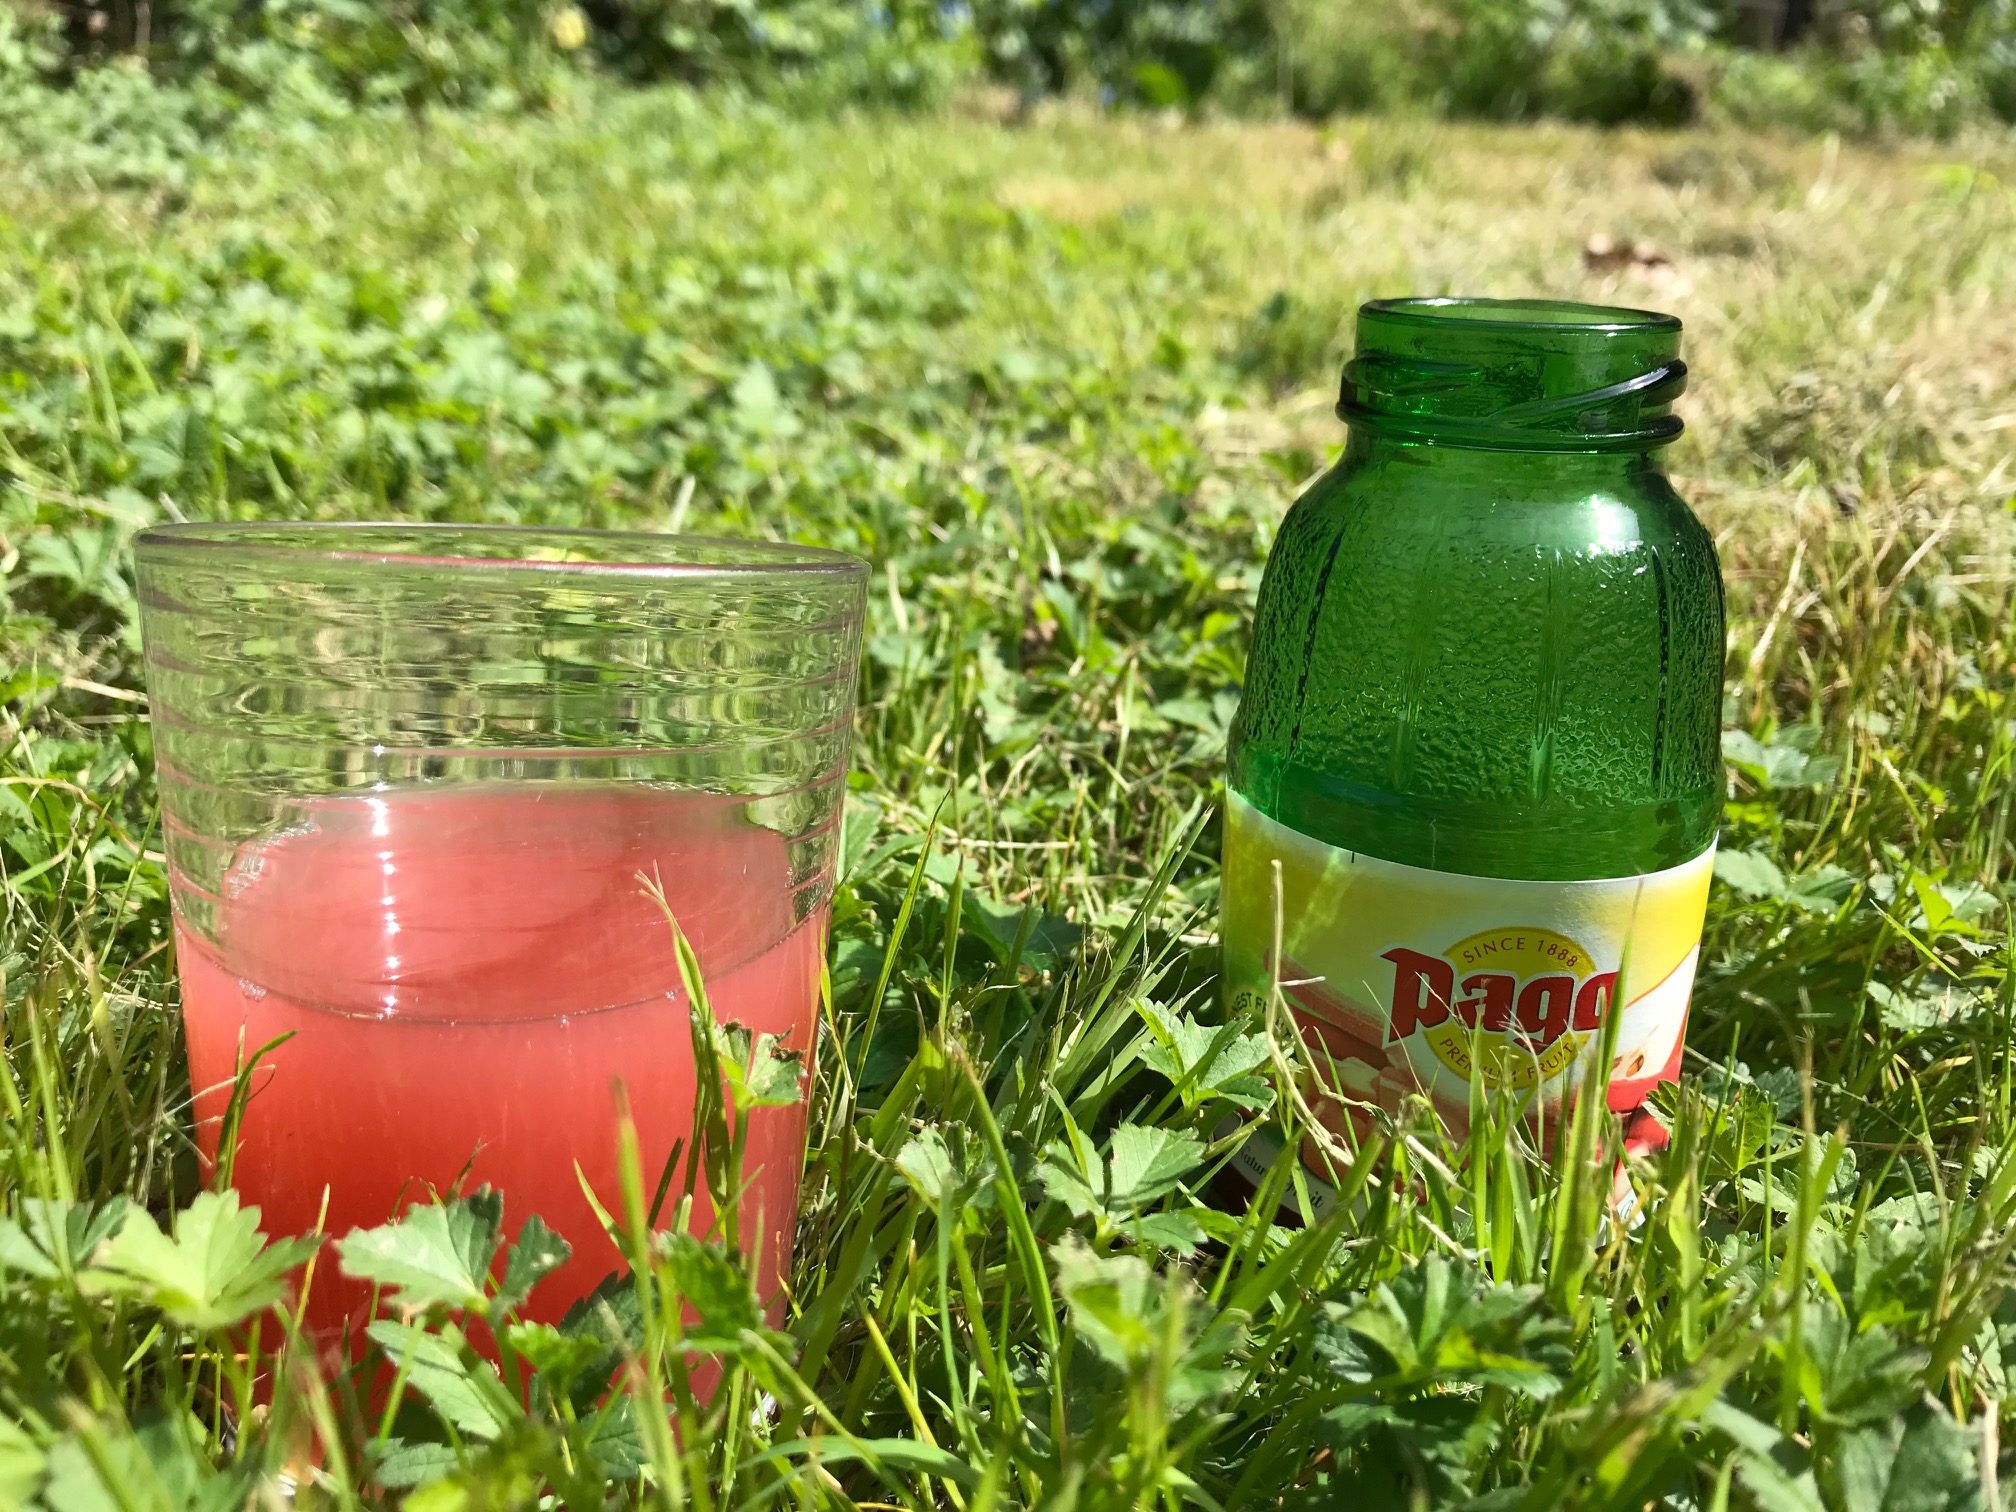 Product review – Pago juices